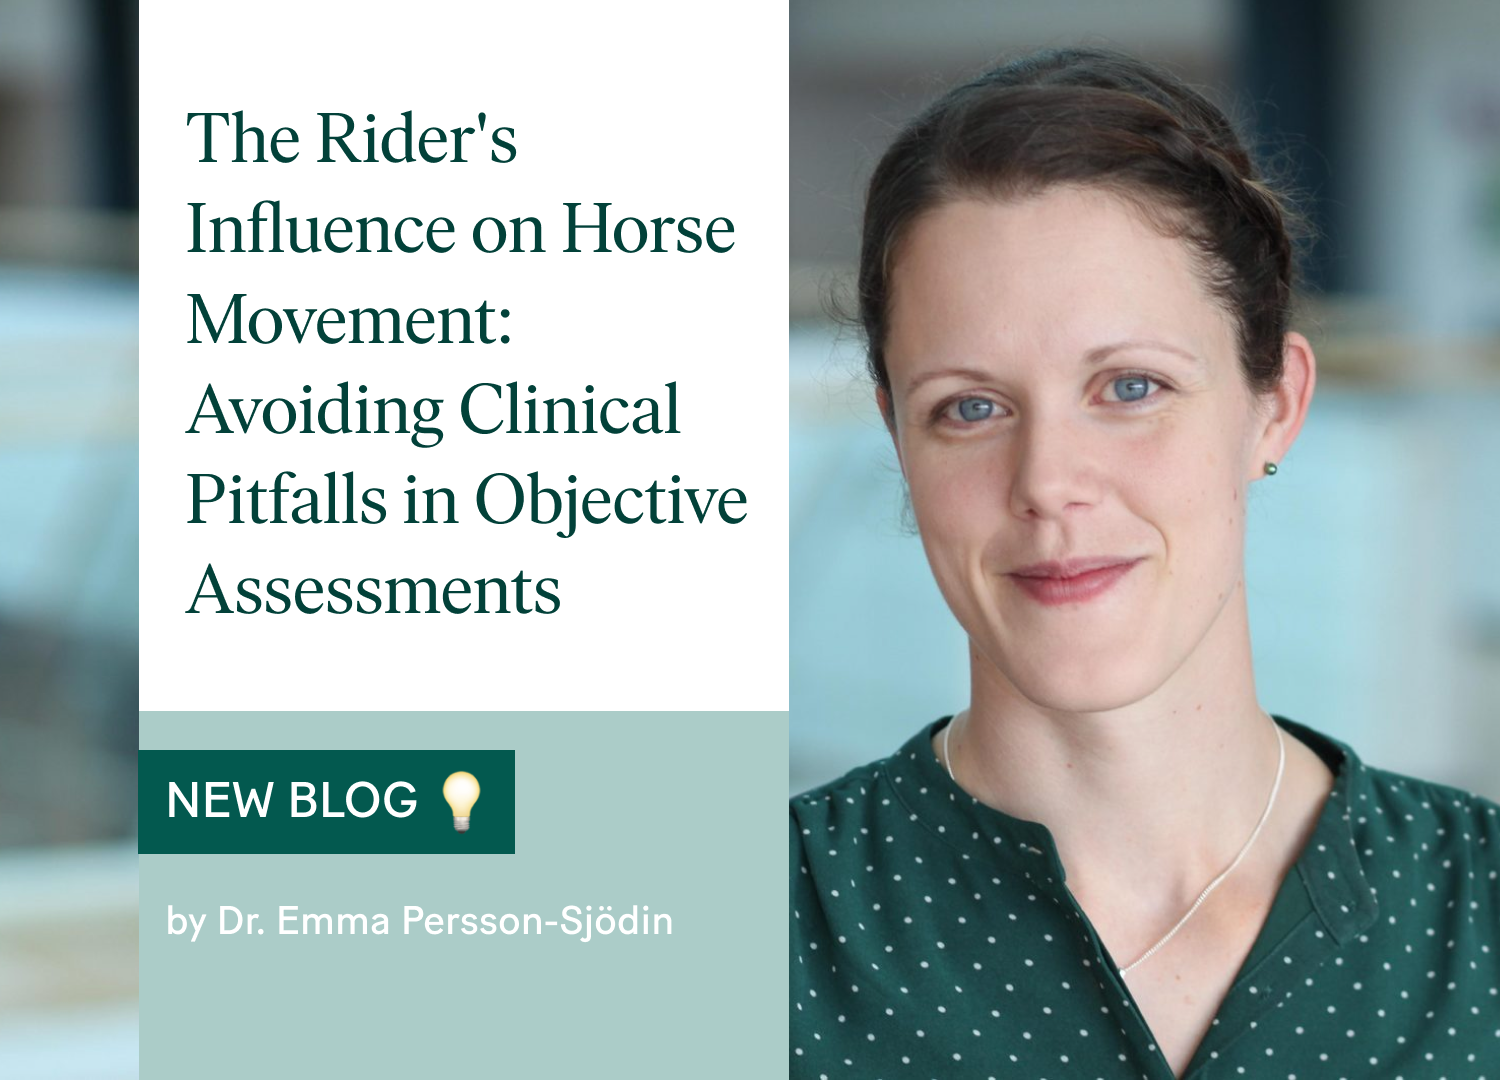 The Rider's Influence on Horse Movement: Avoiding Clinical Pitfalls in Objective Assessments